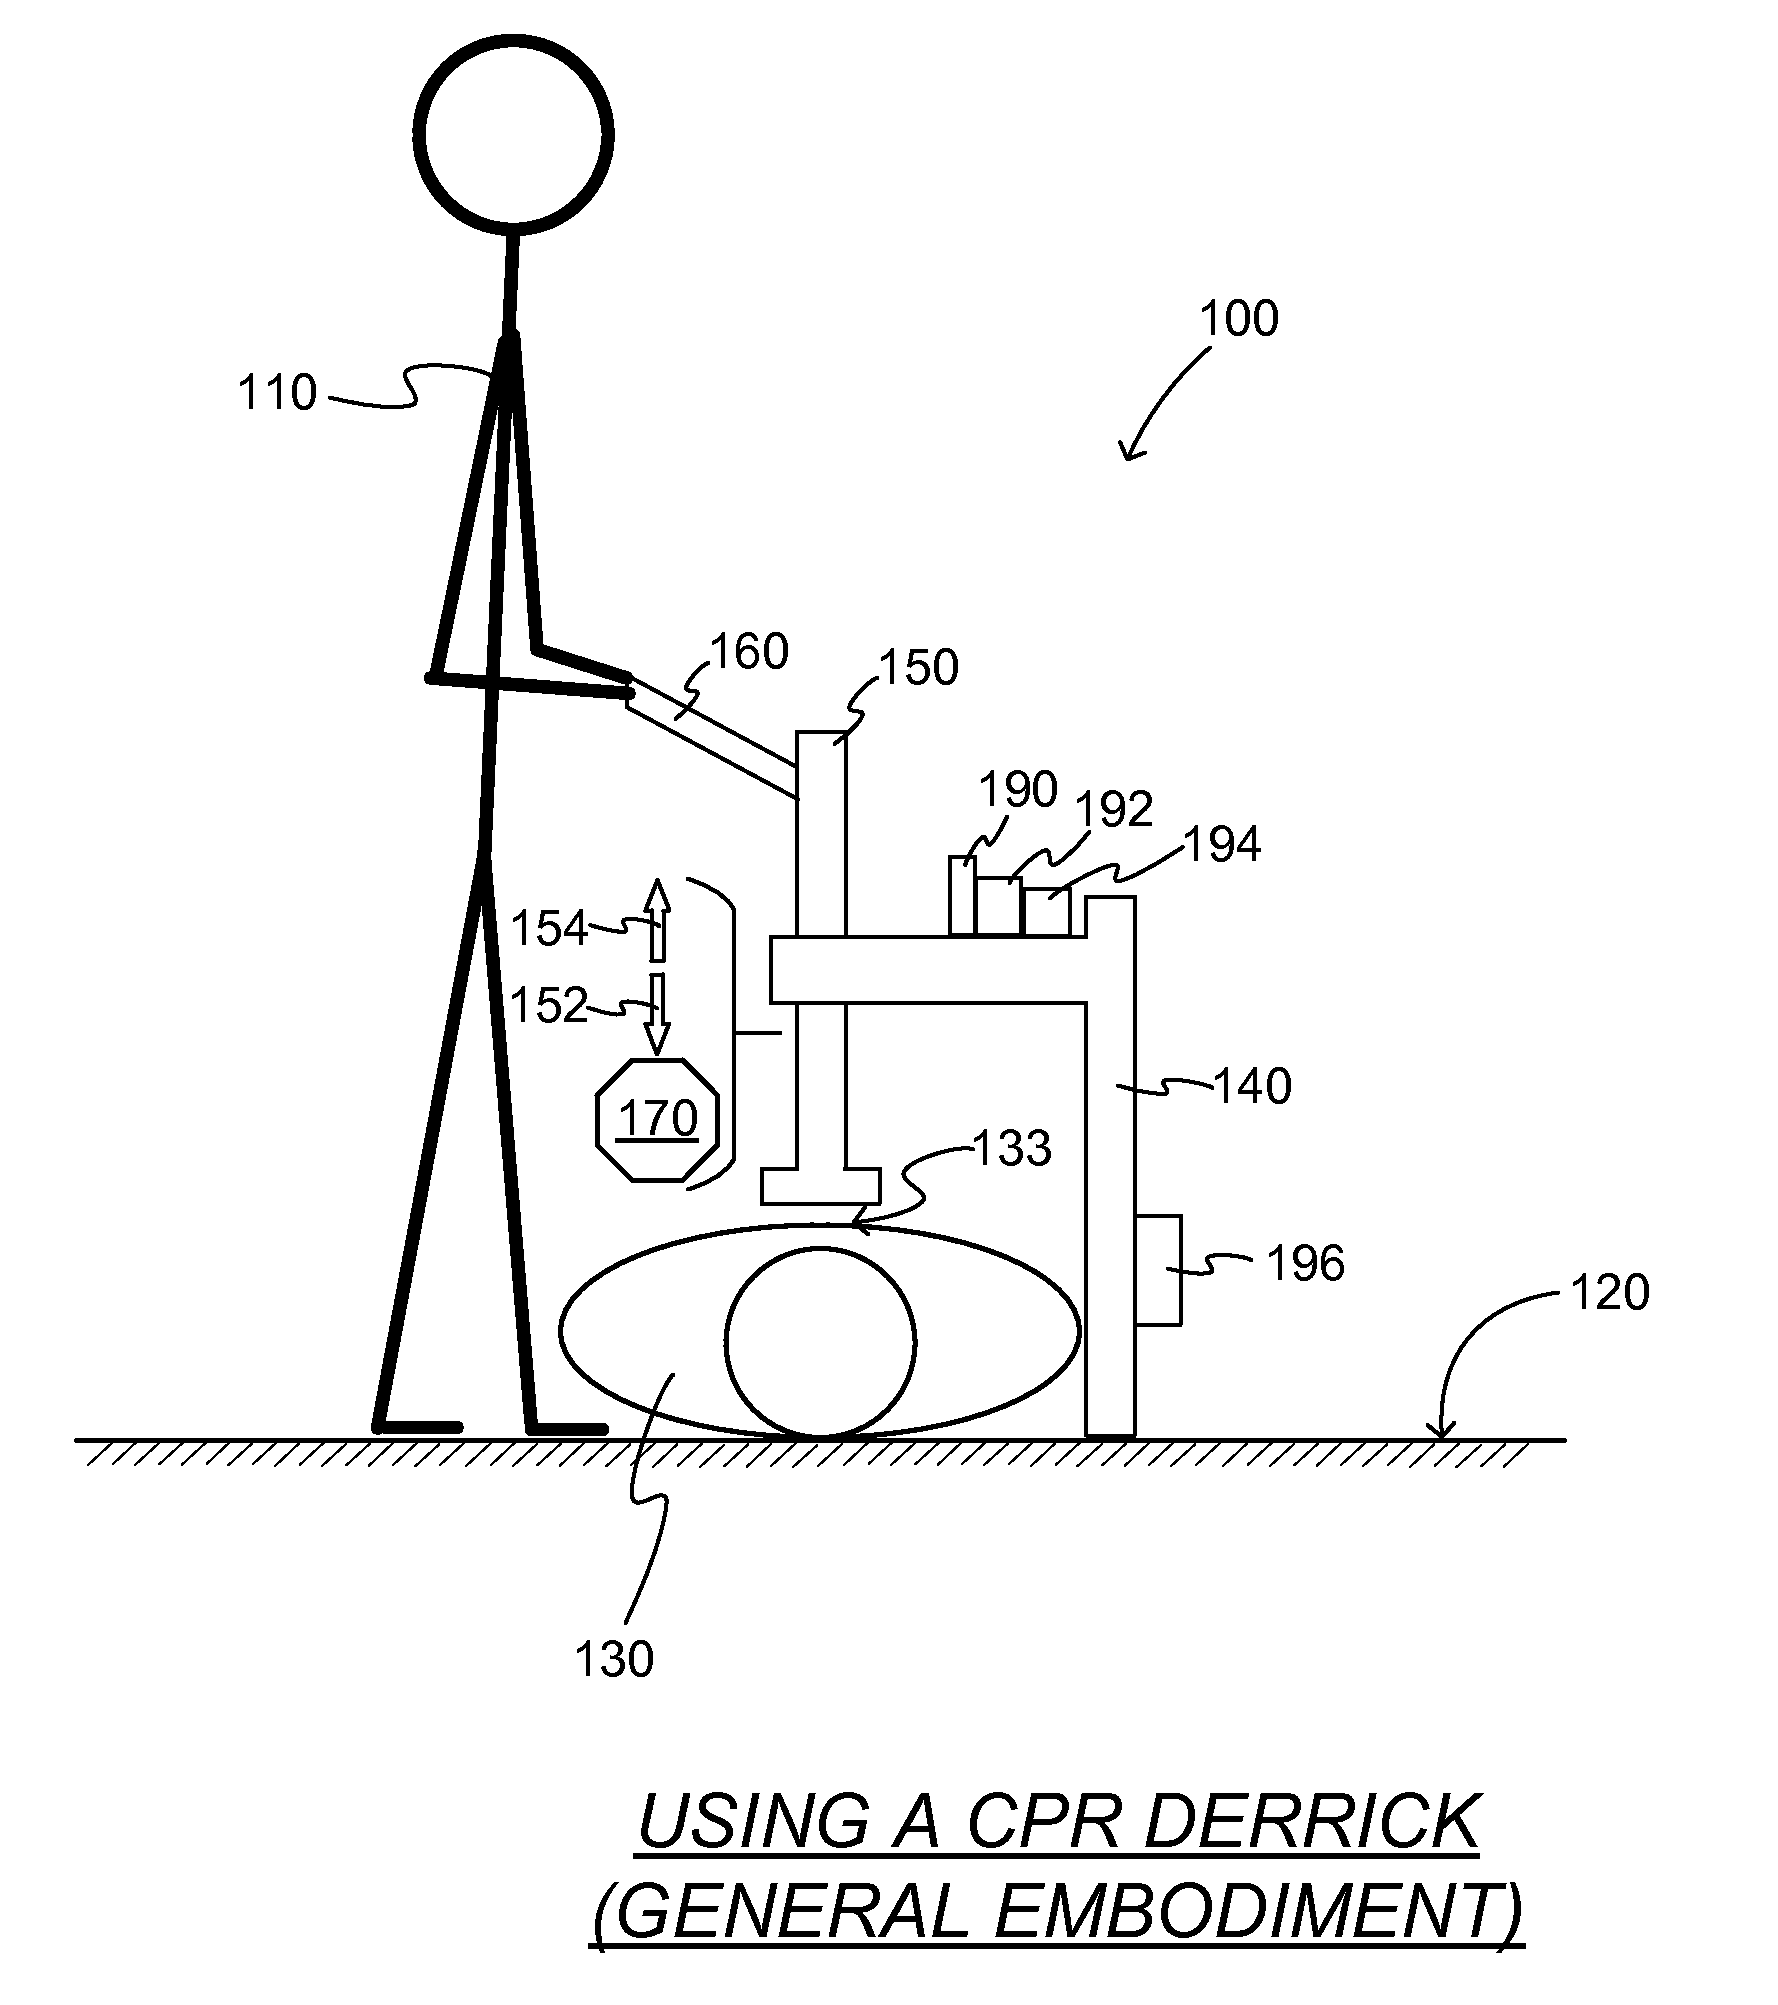 Devices and methods for performing cpr while standing up